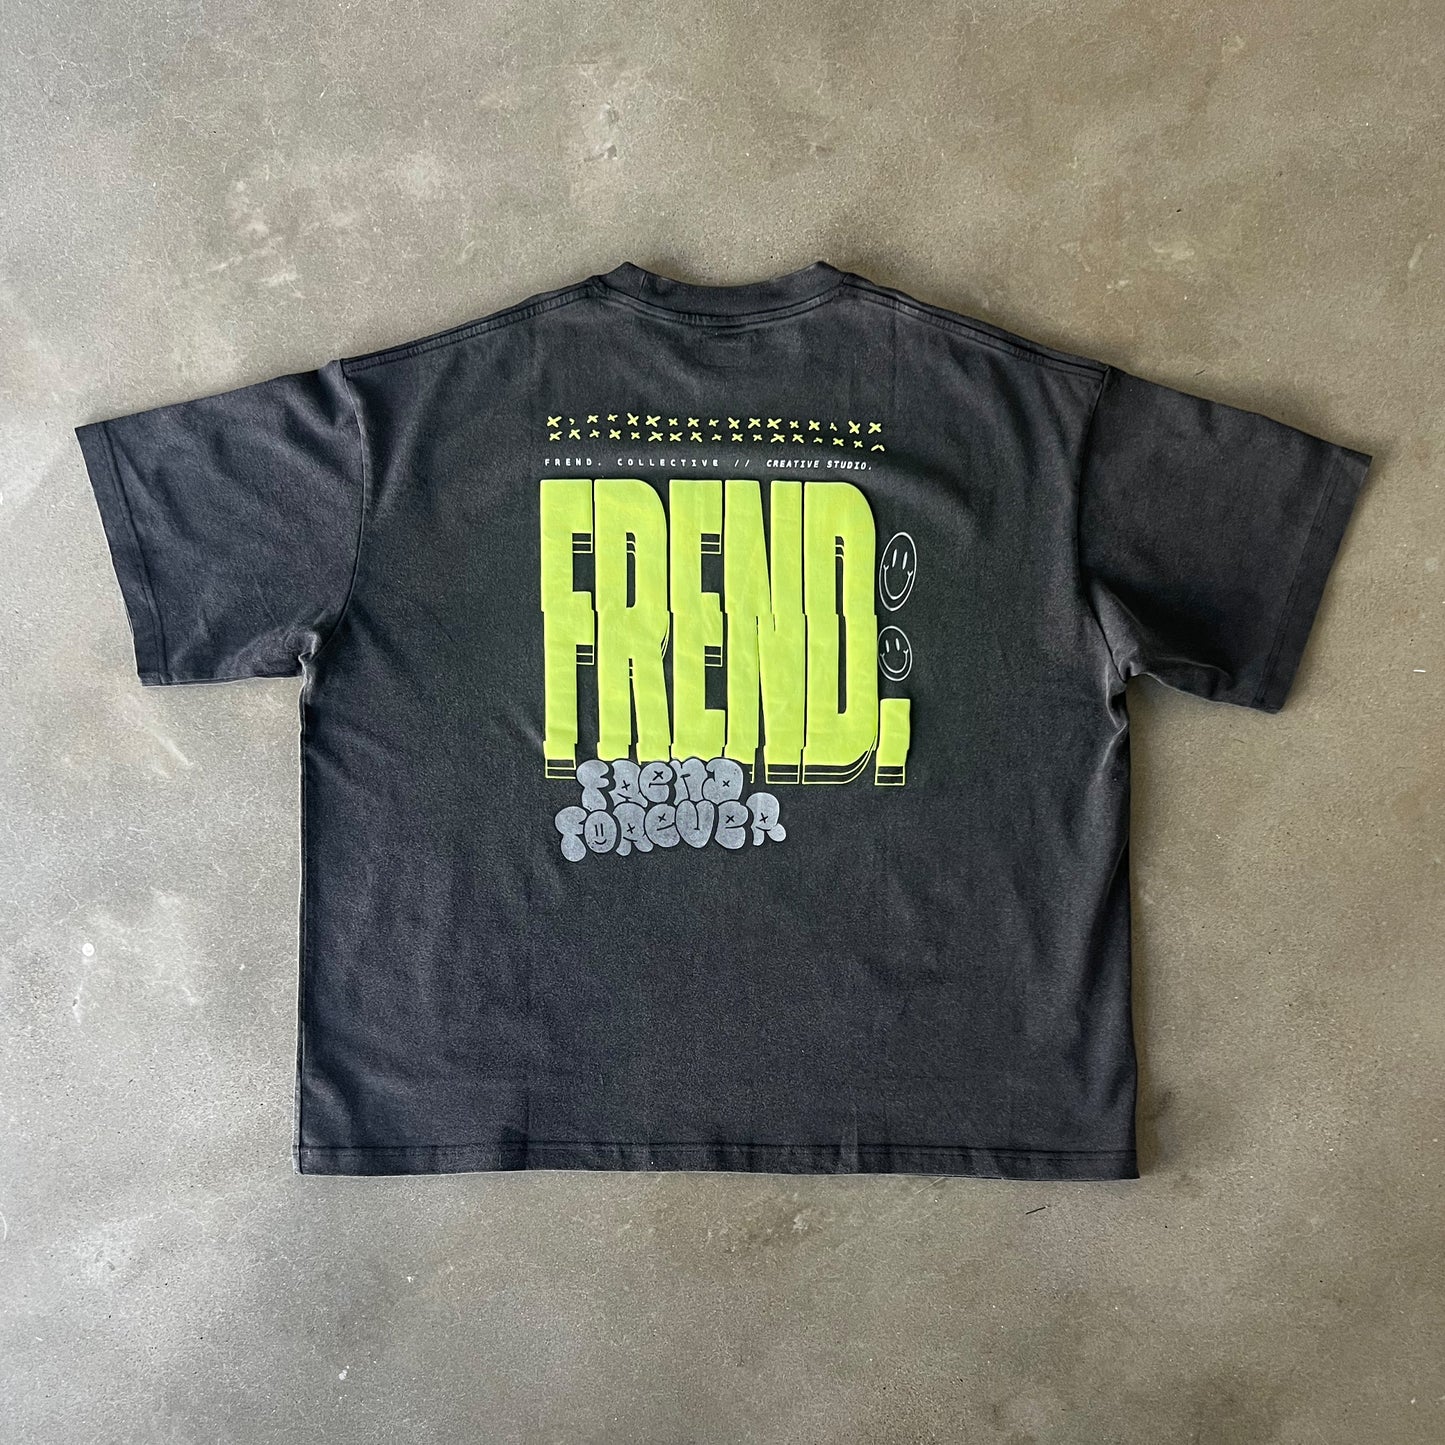 FREND FOREVER - CHARCOAL